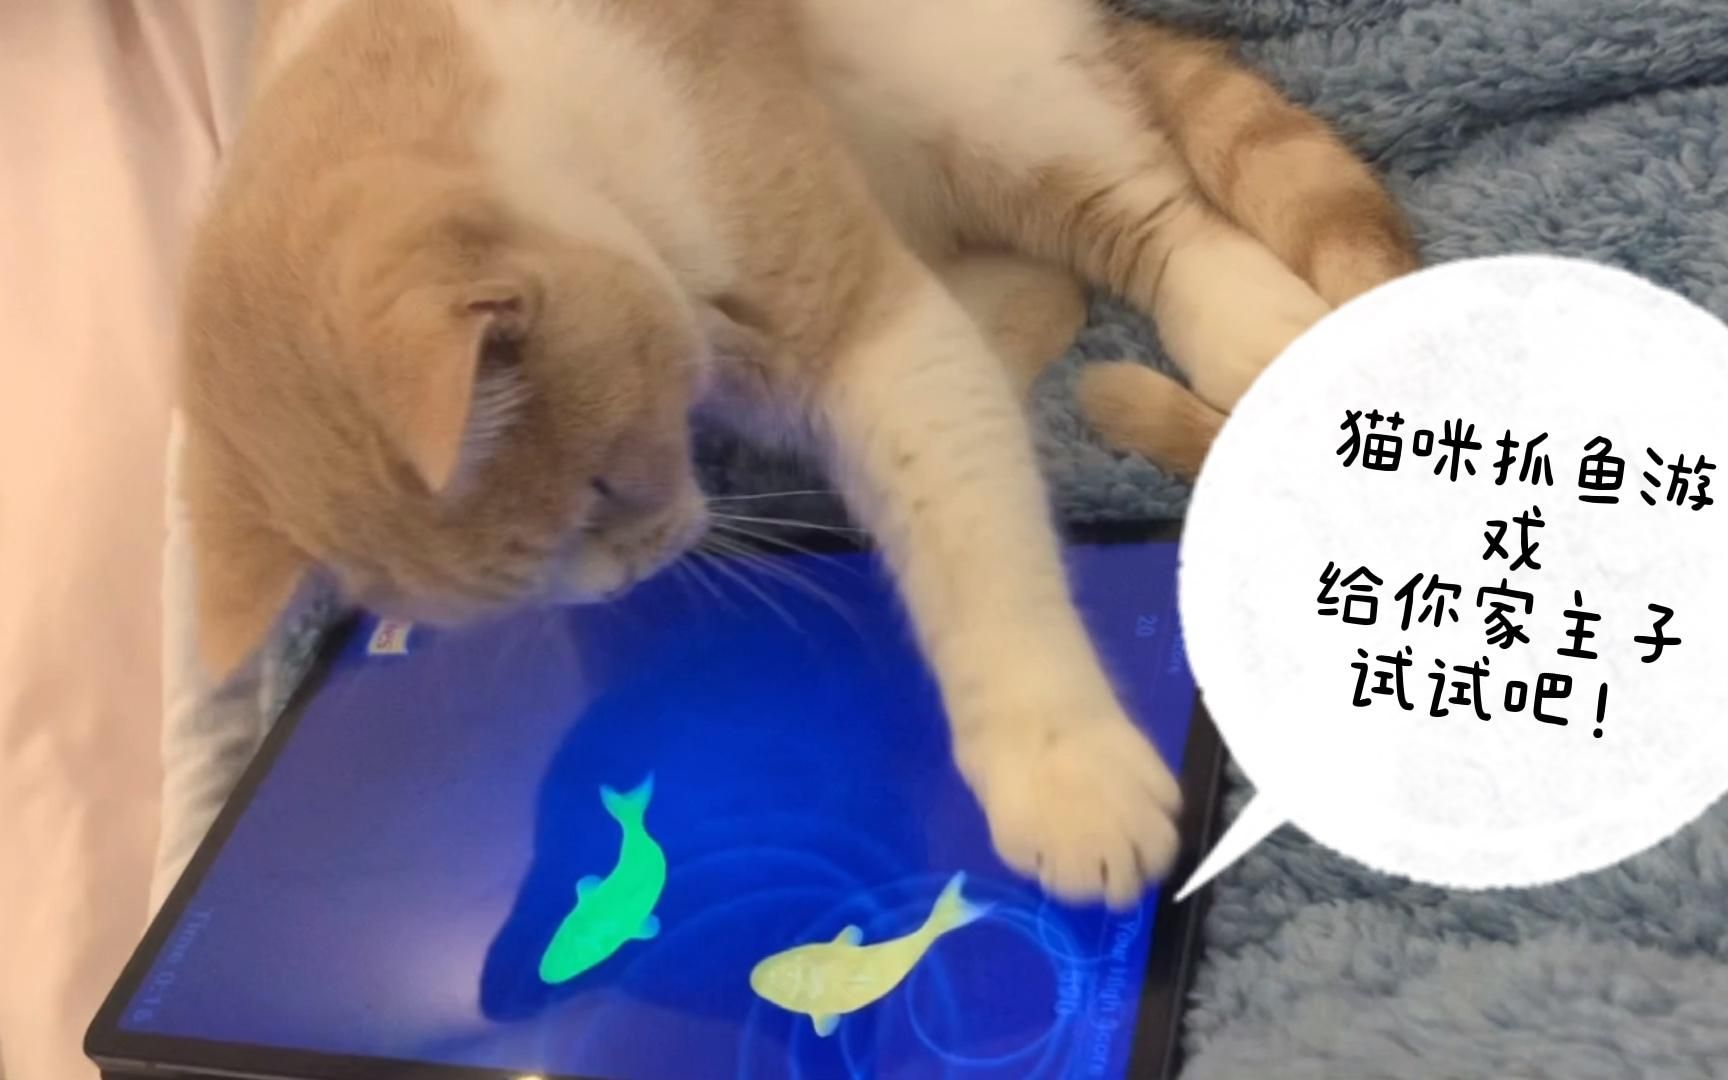 Sign up for a catching fish game will give you a gift_Catching fish game_Cat catching fish game